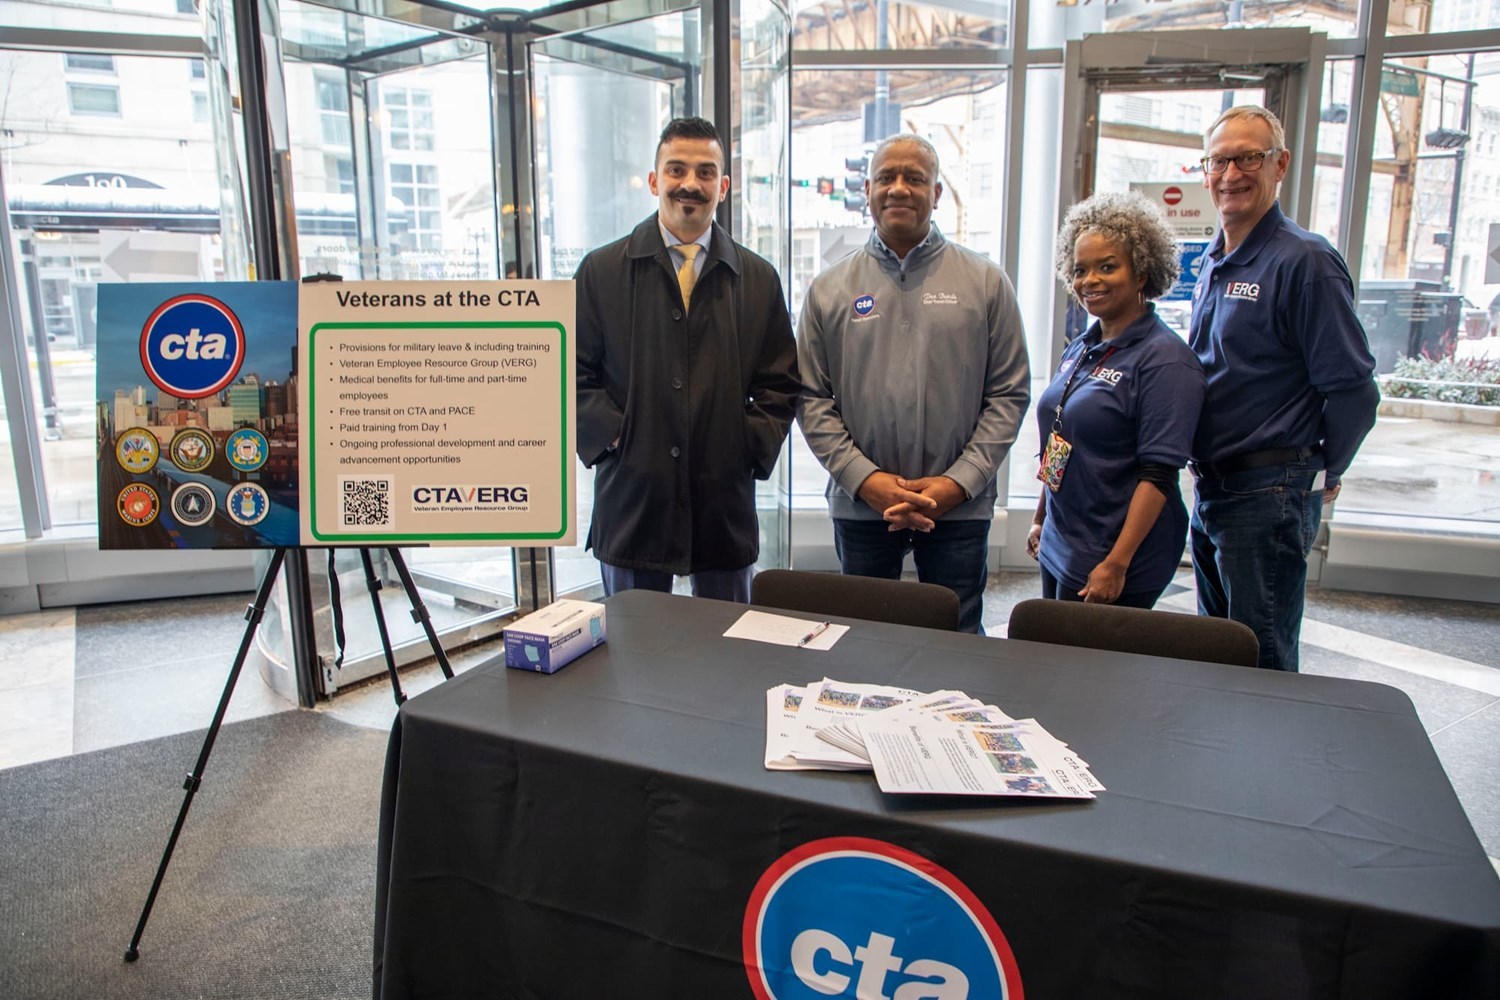 CTA employees behind a table sharing information about the CTA Veteran Employee Resource Group